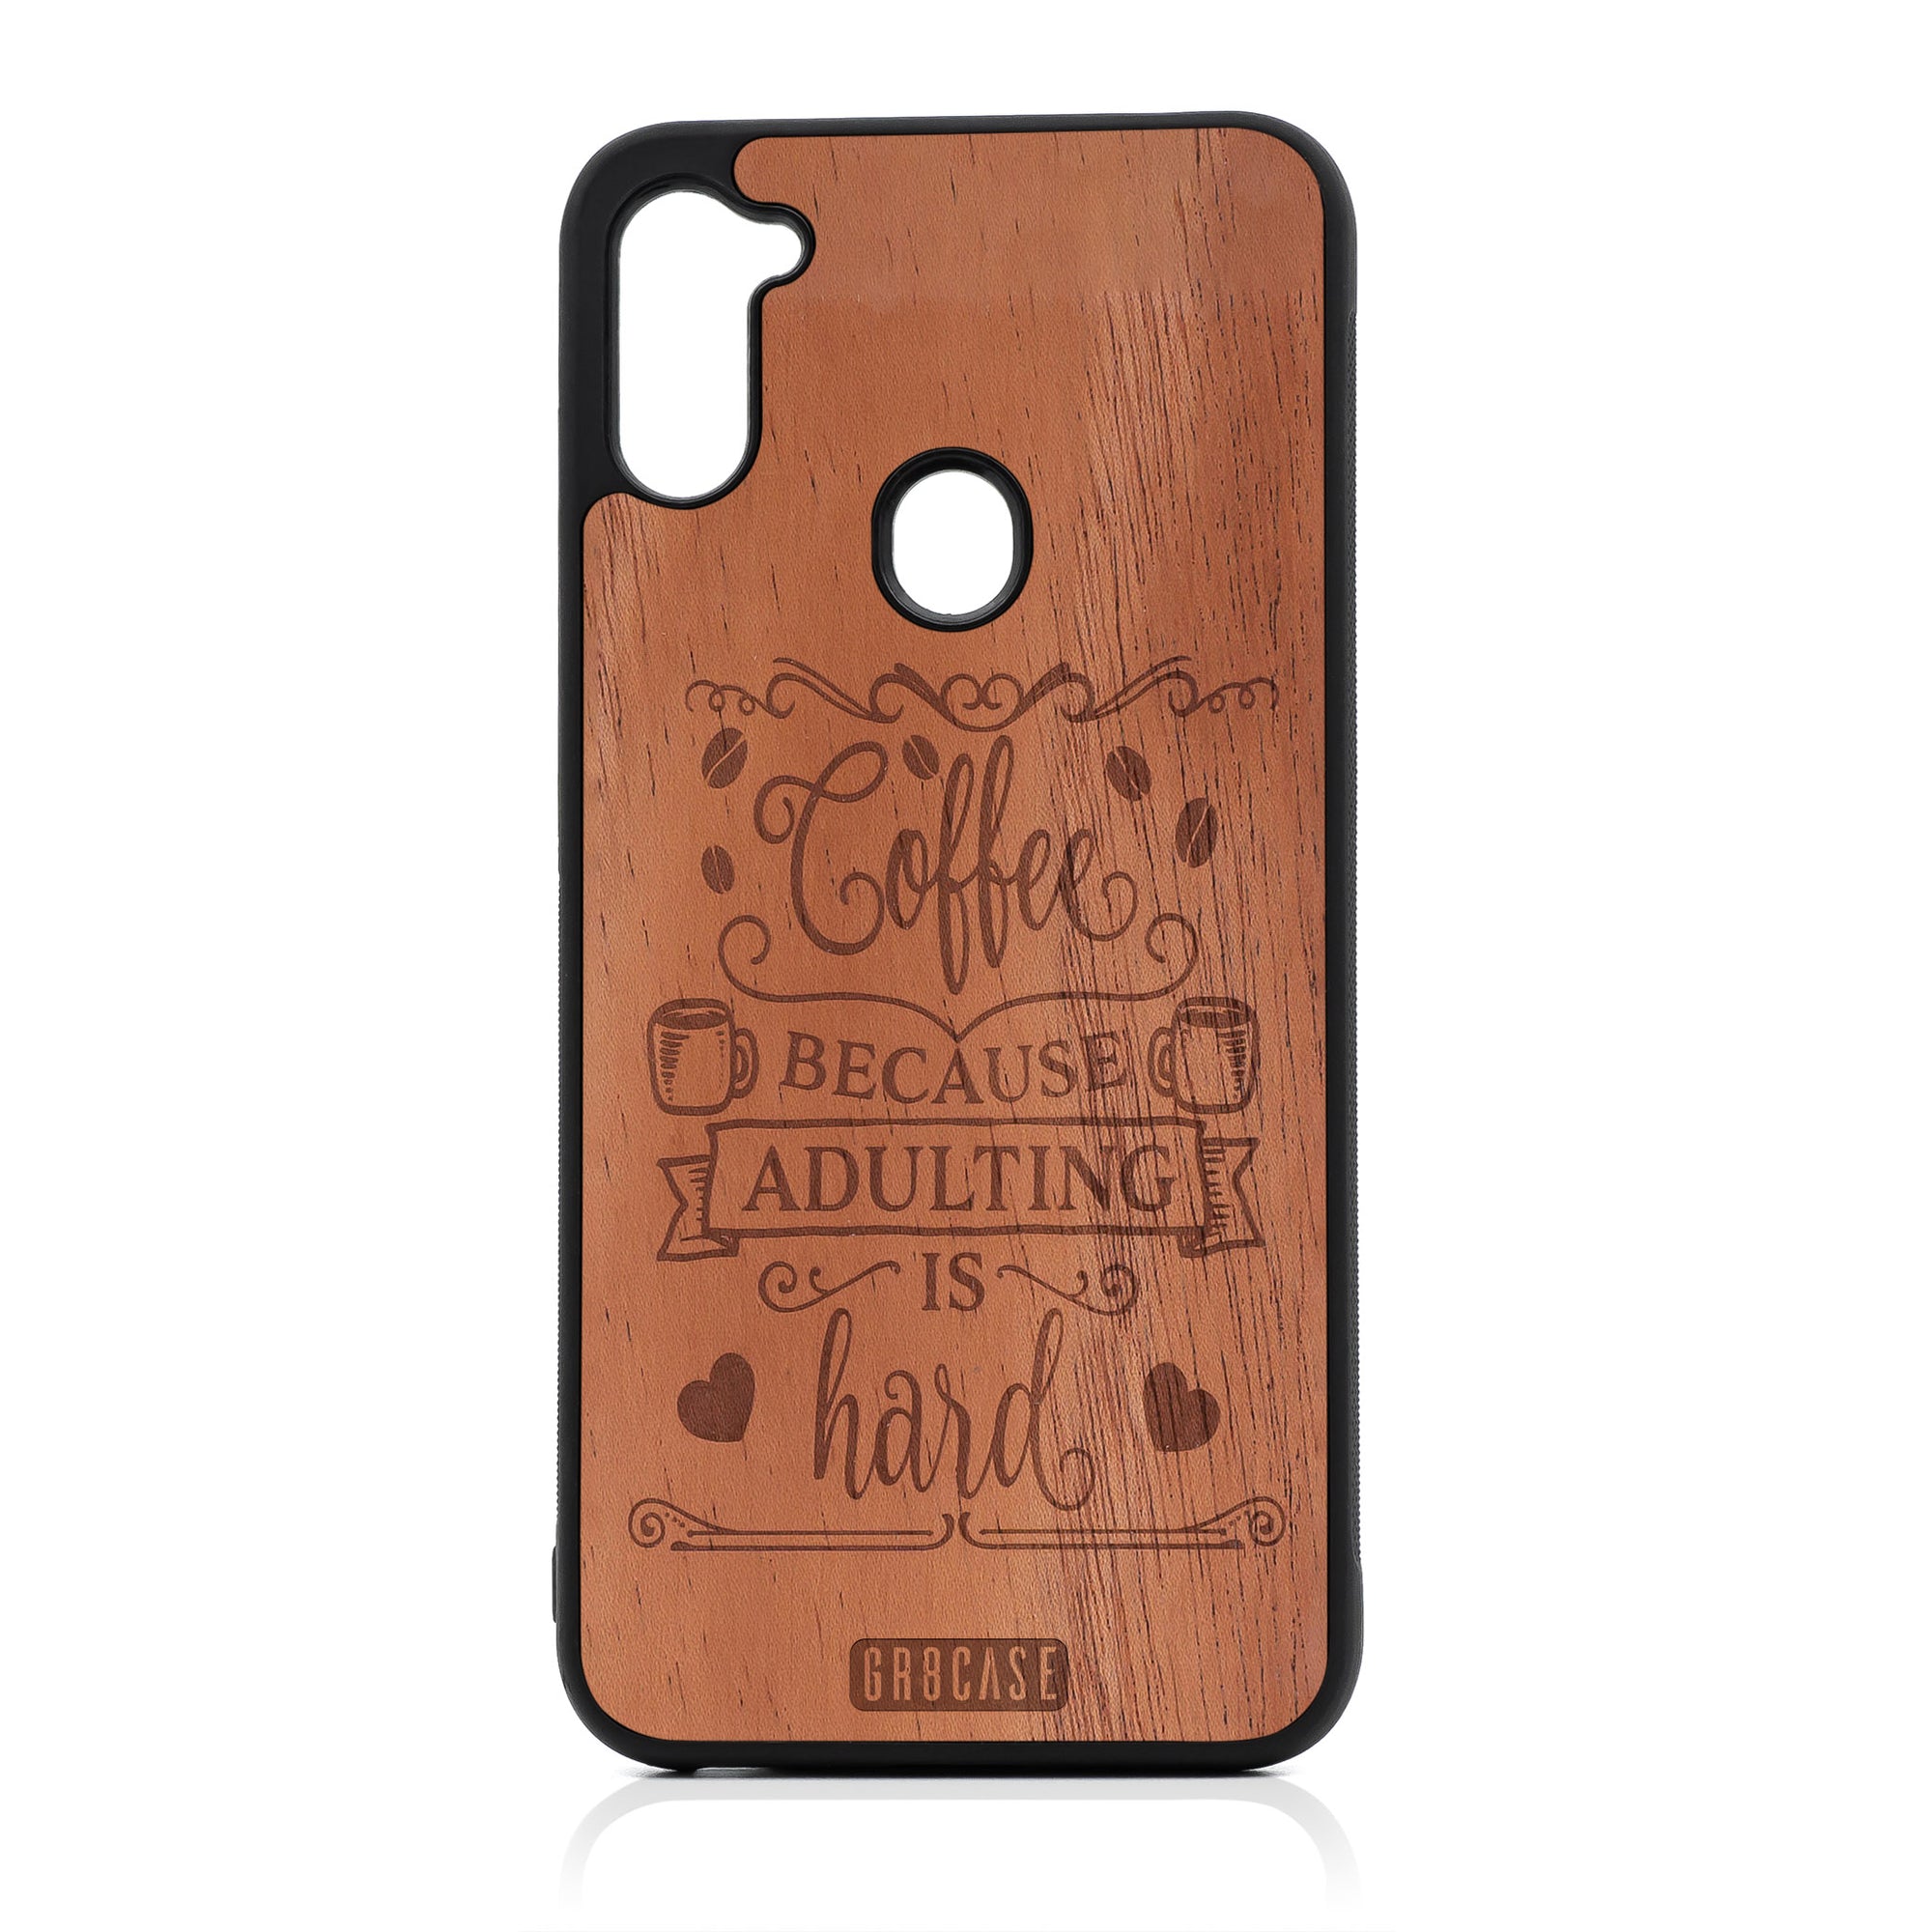 Coffee Because Adulting Is Hard Design Wood Case For Samsung Galaxy A11